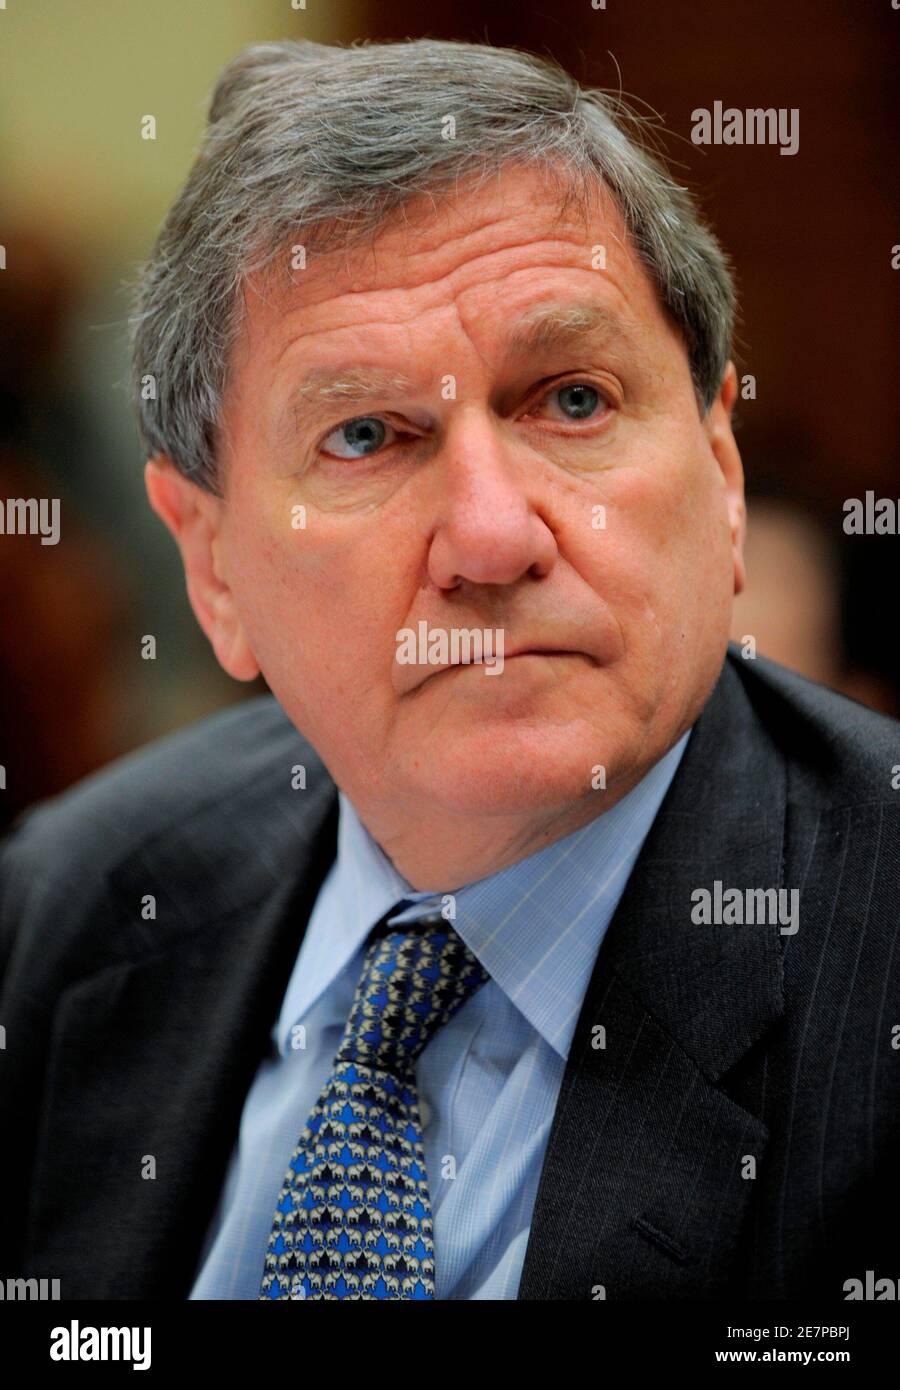 U.S. Special Representative for Afghanistan and Pakistan Richard Holbrooke listens to opening statements as he prepares to testify before a House Foreign Affairs Committee hearing on 'The Future of the US-Pakistan Relationship', on Capitol Hill in Washington, May 5, 2009. The panel questioned Holbrooke on recent territorial gains by the Taliban in western Pakistan.         REUTERS/Mike Theiler   (UNITED STATES POLITICS CONFLICT HEADSHOT) Stock Photo